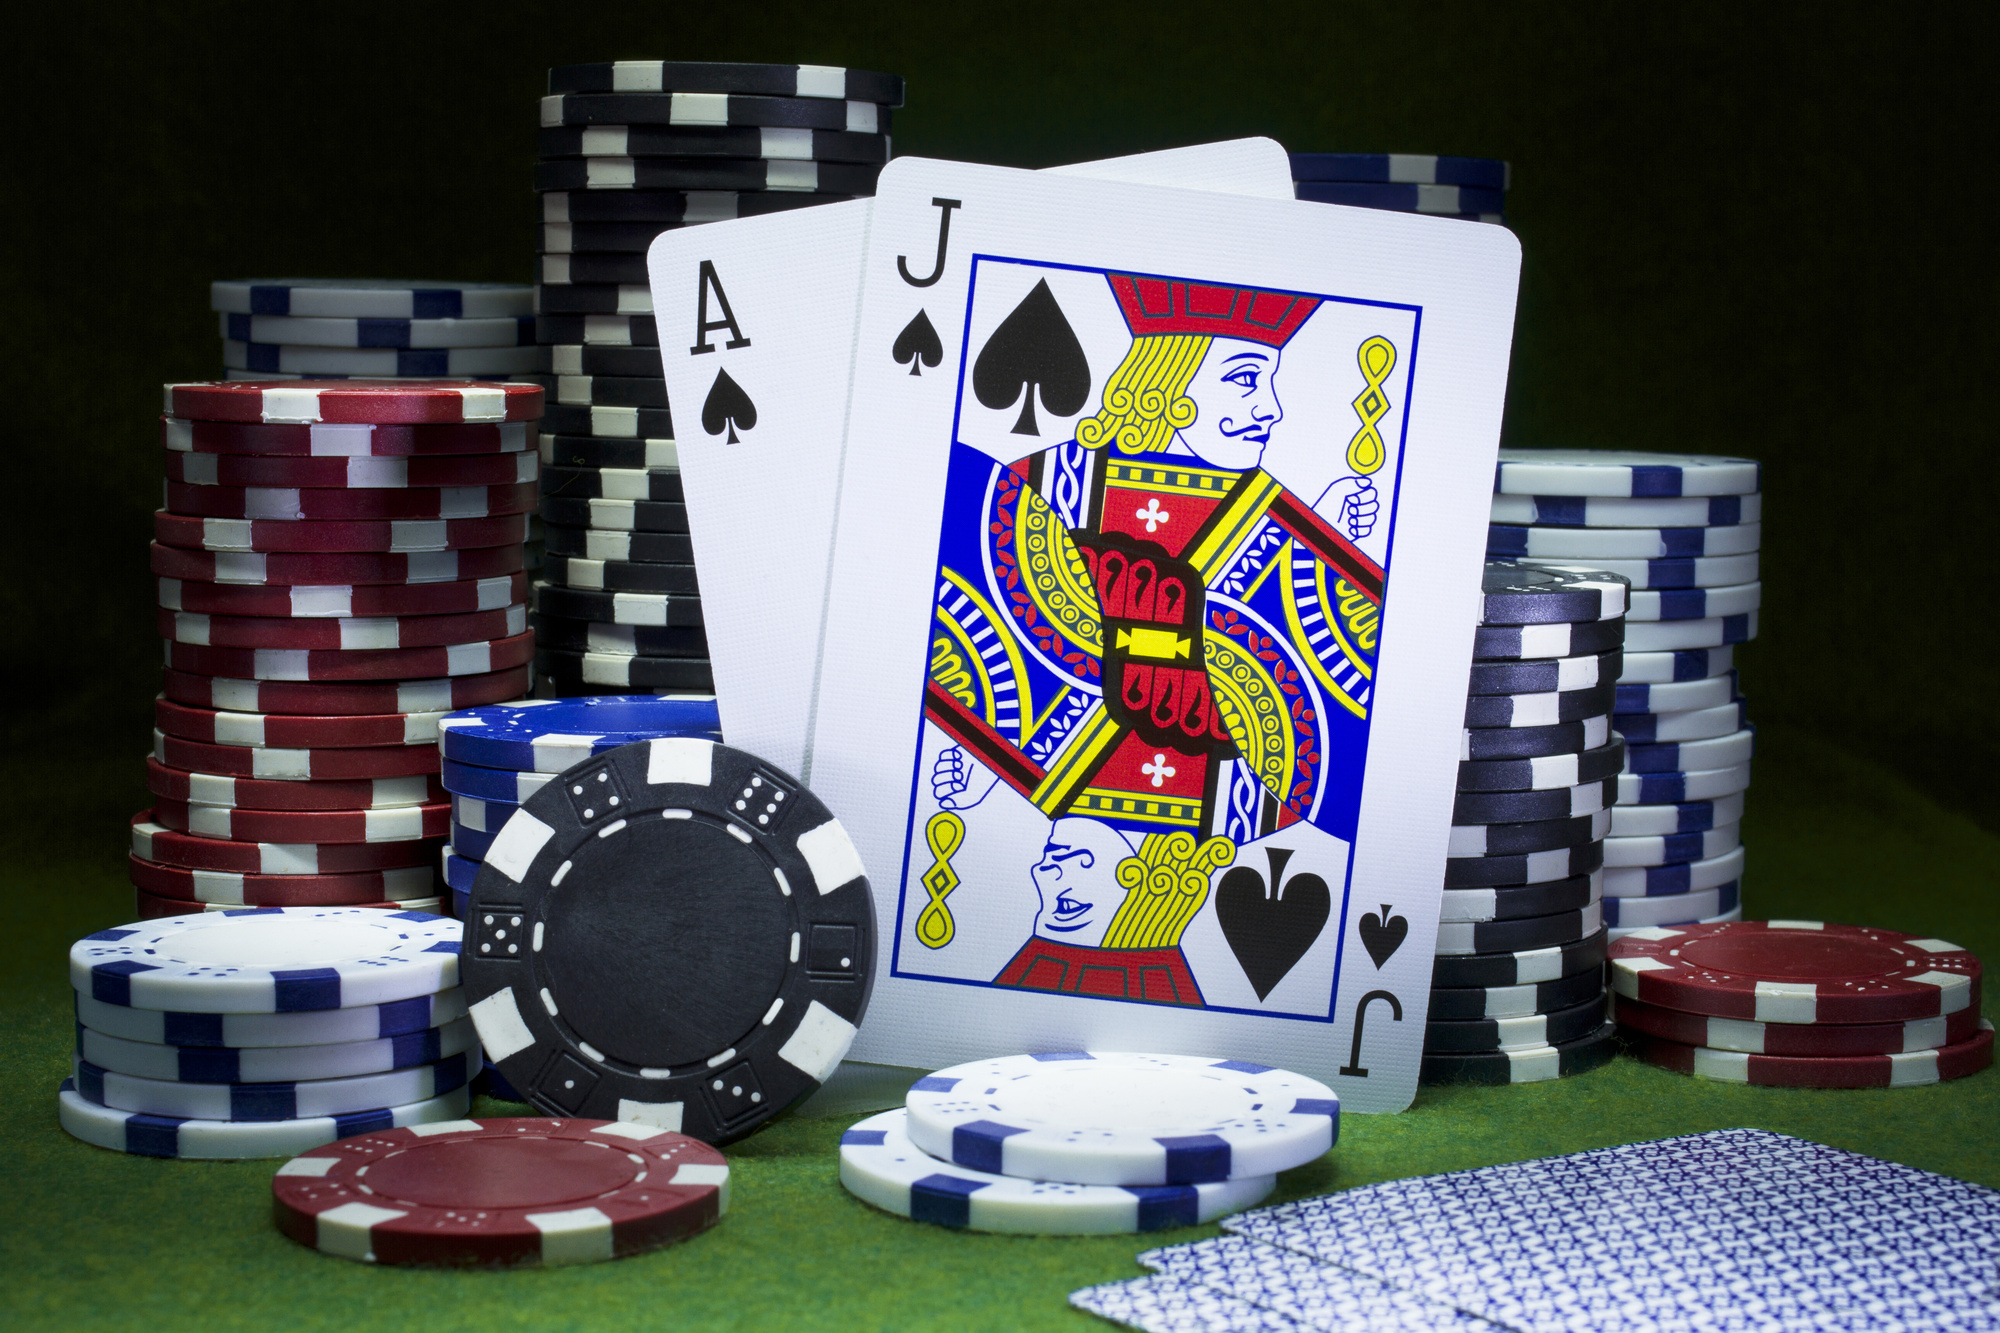 7 Fun Casino Games to Try at Your Next Game Night